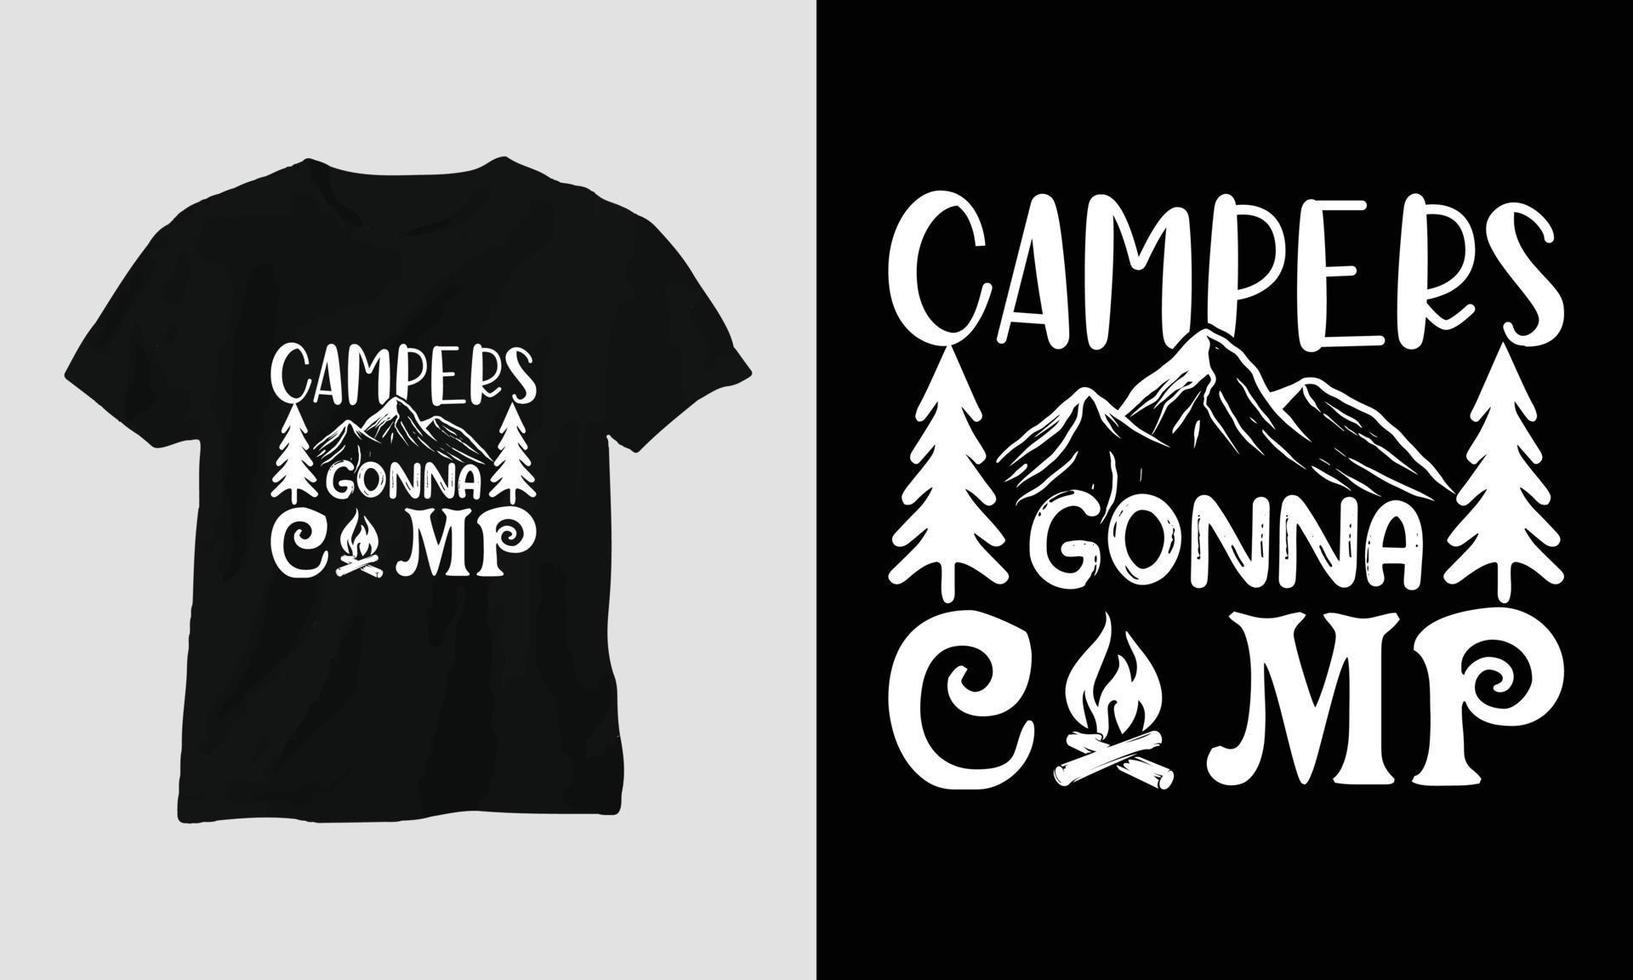 Camping SVG Design with Camp, Tent, Mountain, Jangle, Tree, Ribbon, Hiking silhouette vector